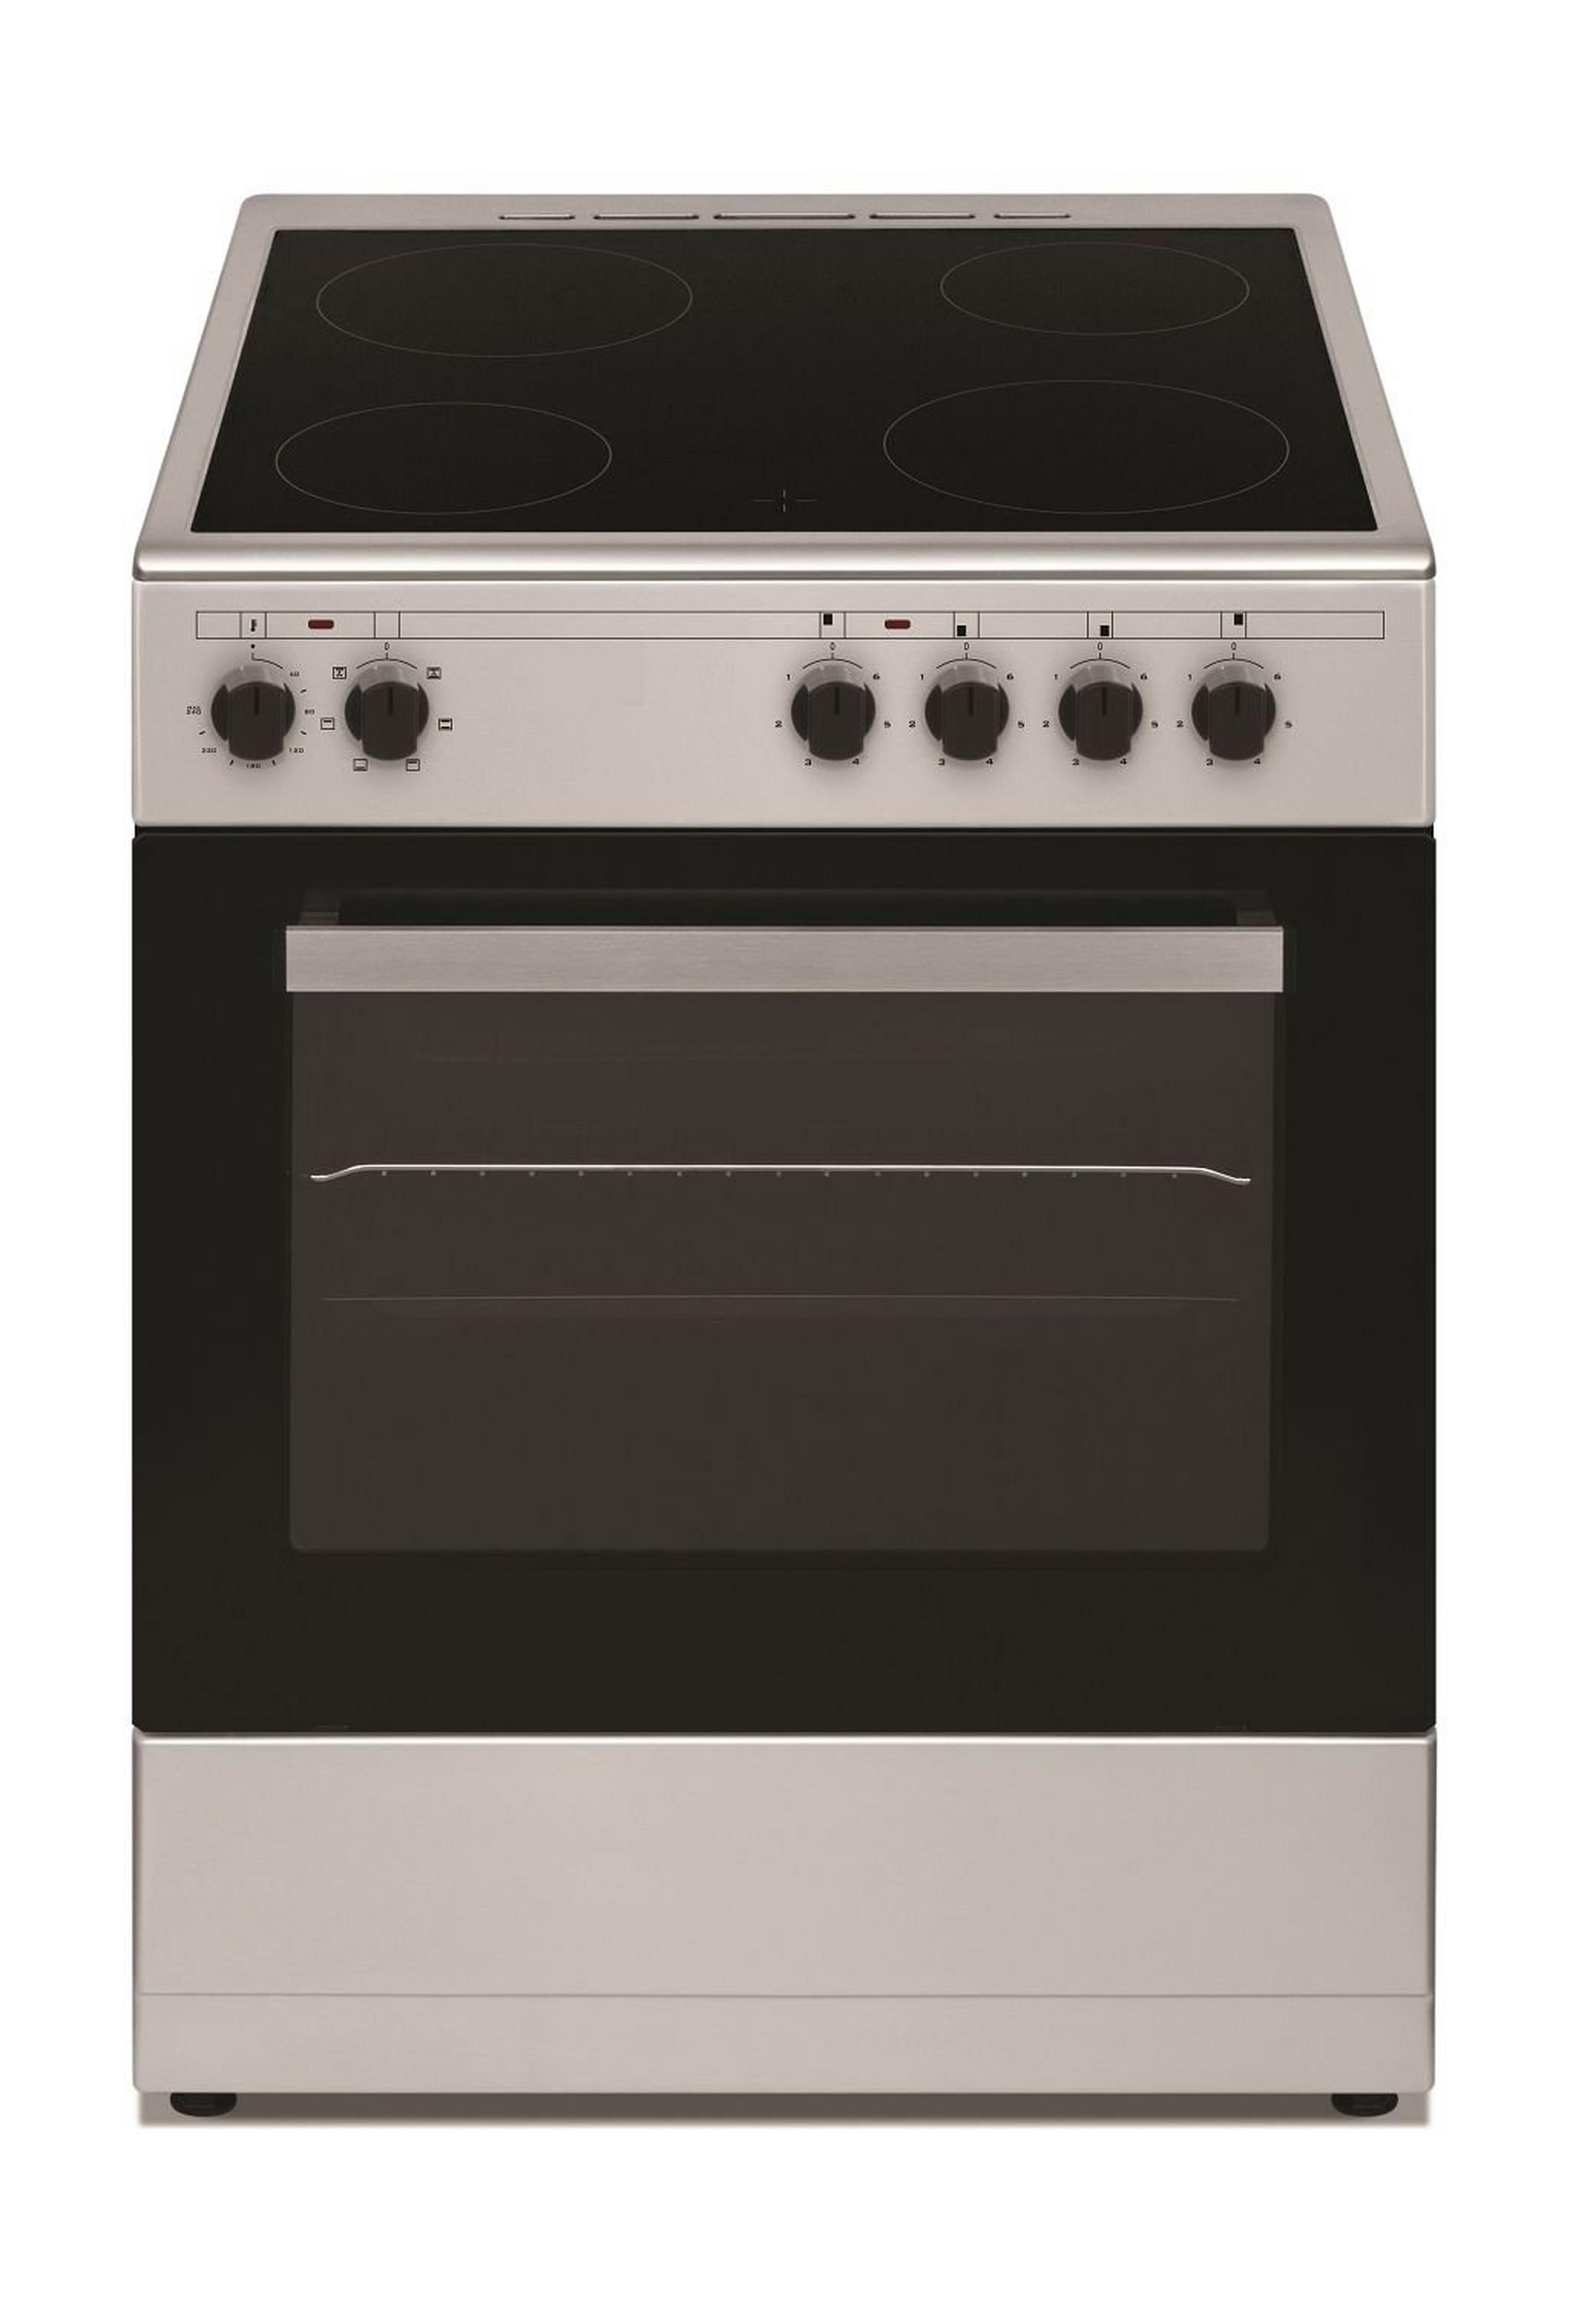 Wansa 60x60cm 4 Ceramic Burners, Electric Cooker (WCT6040041X) – Stainless Steel